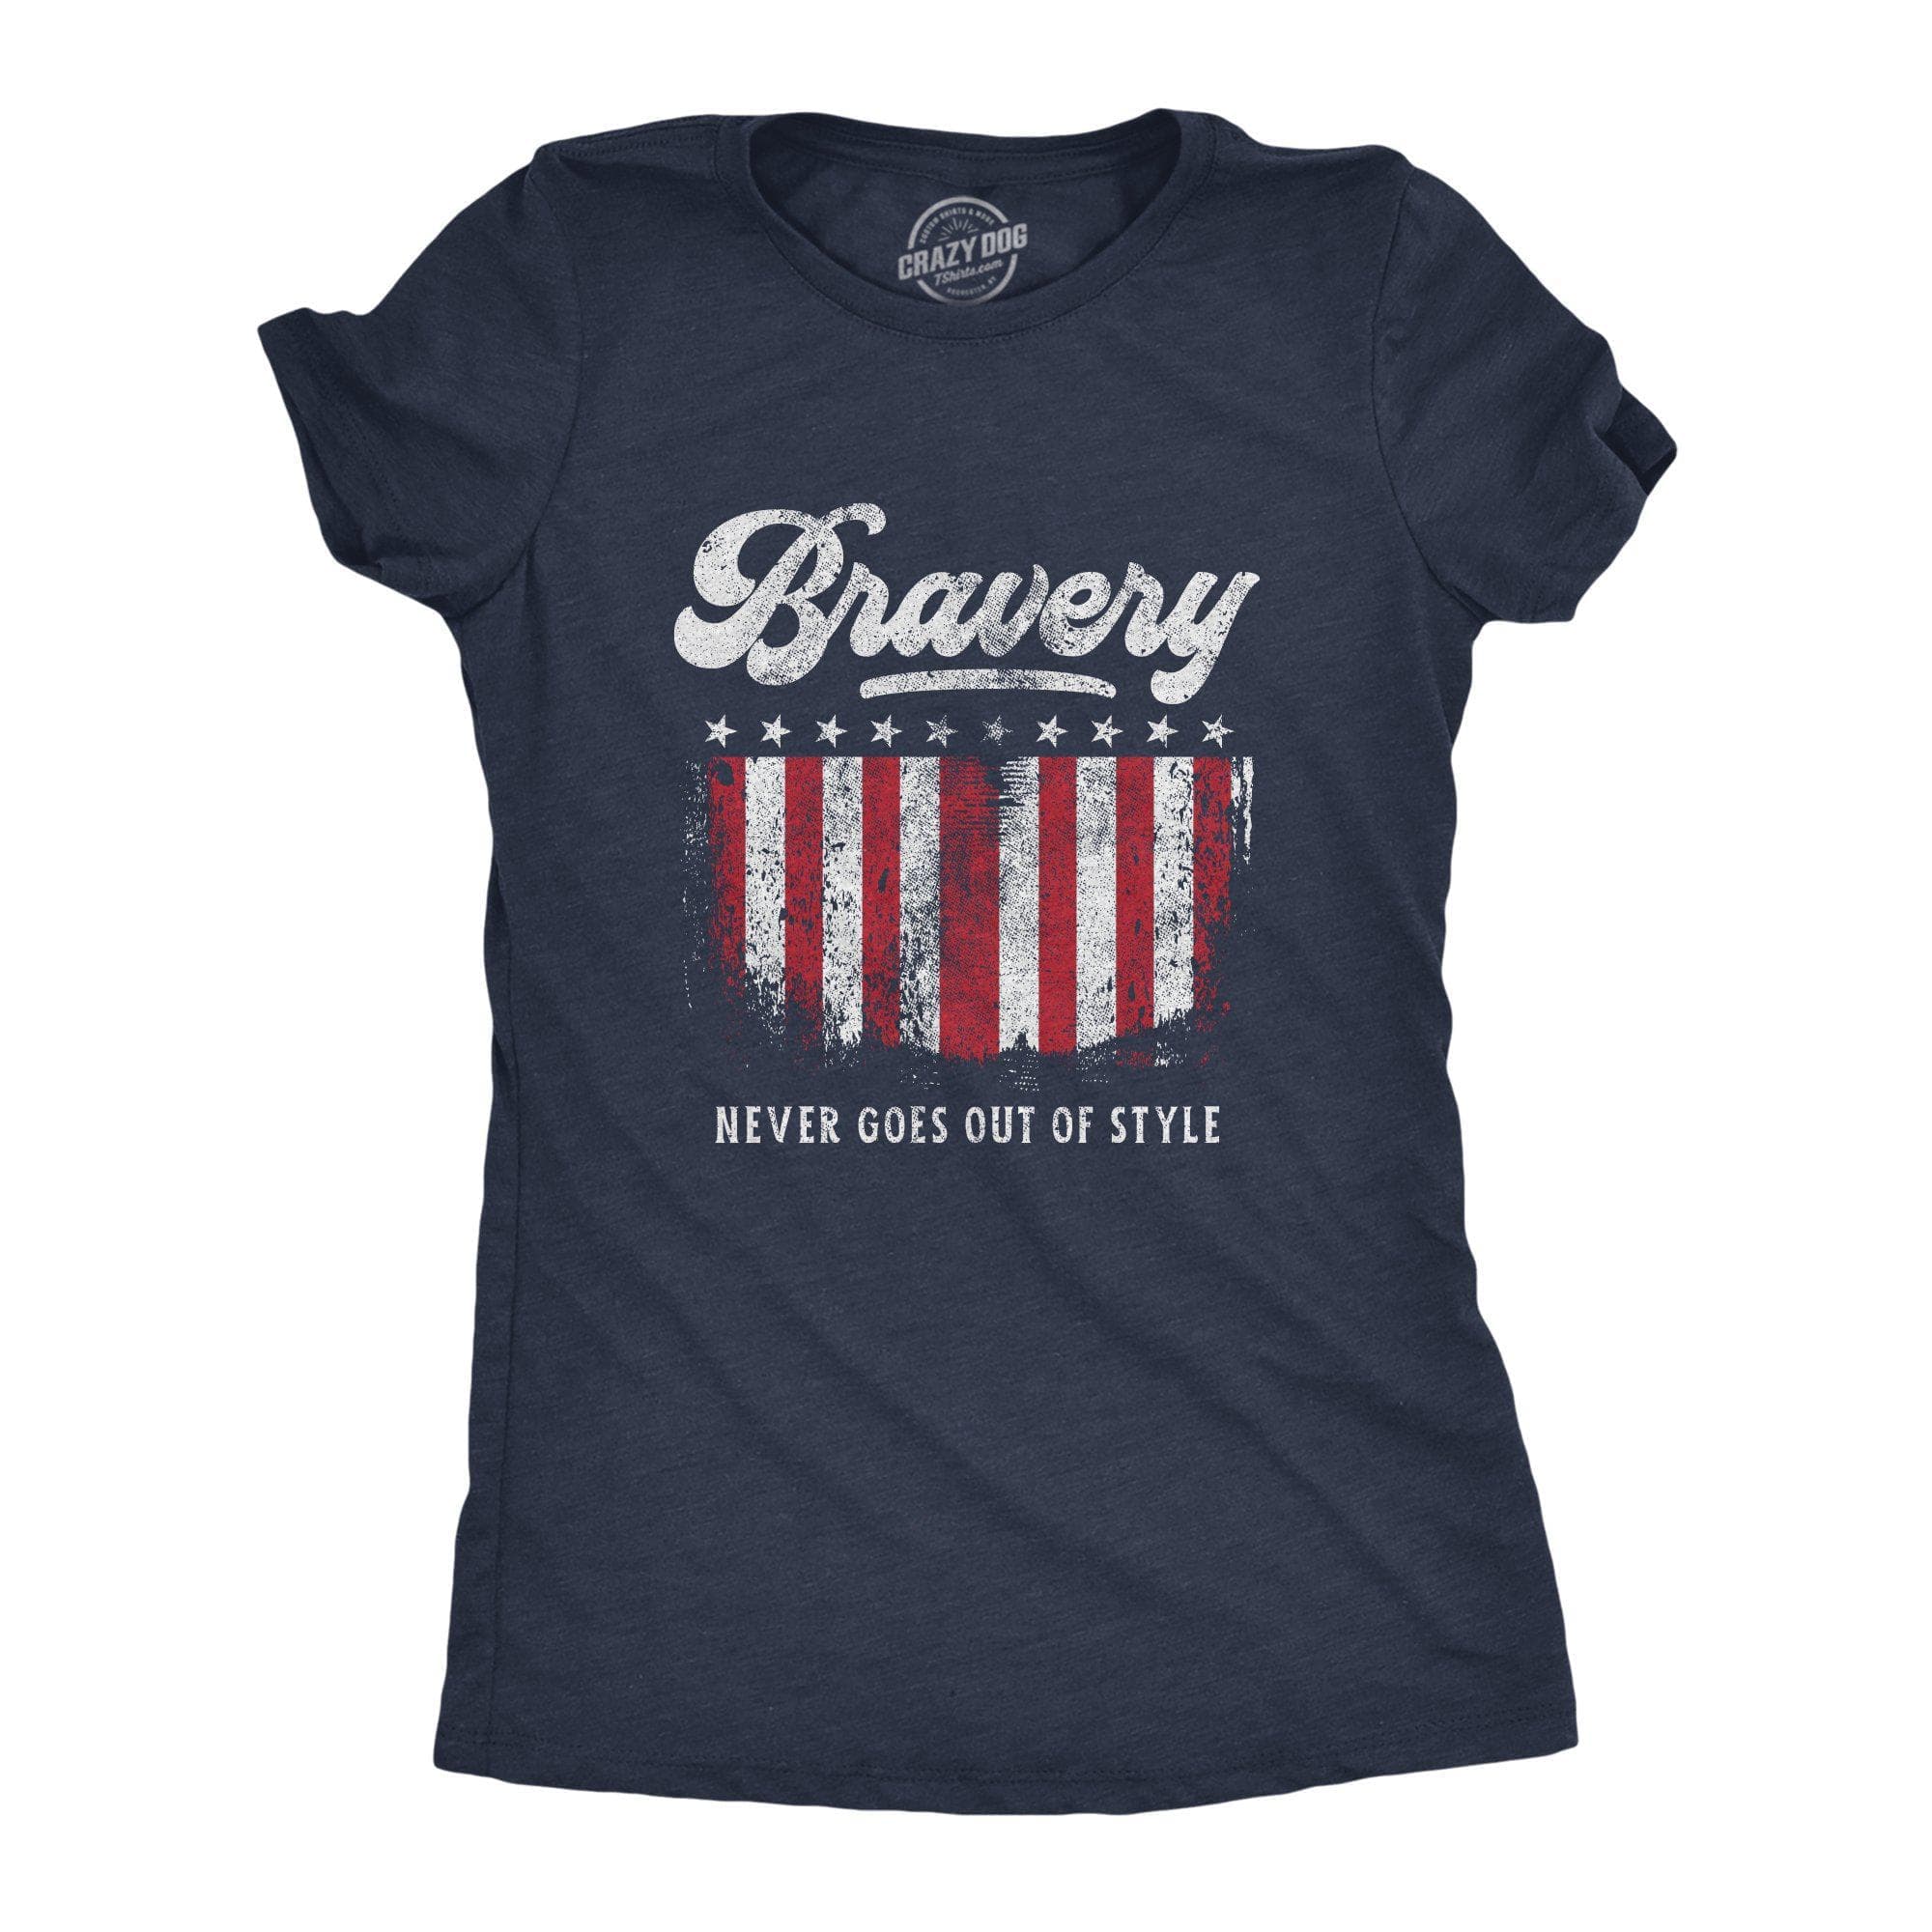 Bravery Never Goes Out Of Style Women's Tshirt - Crazy Dog T-Shirts